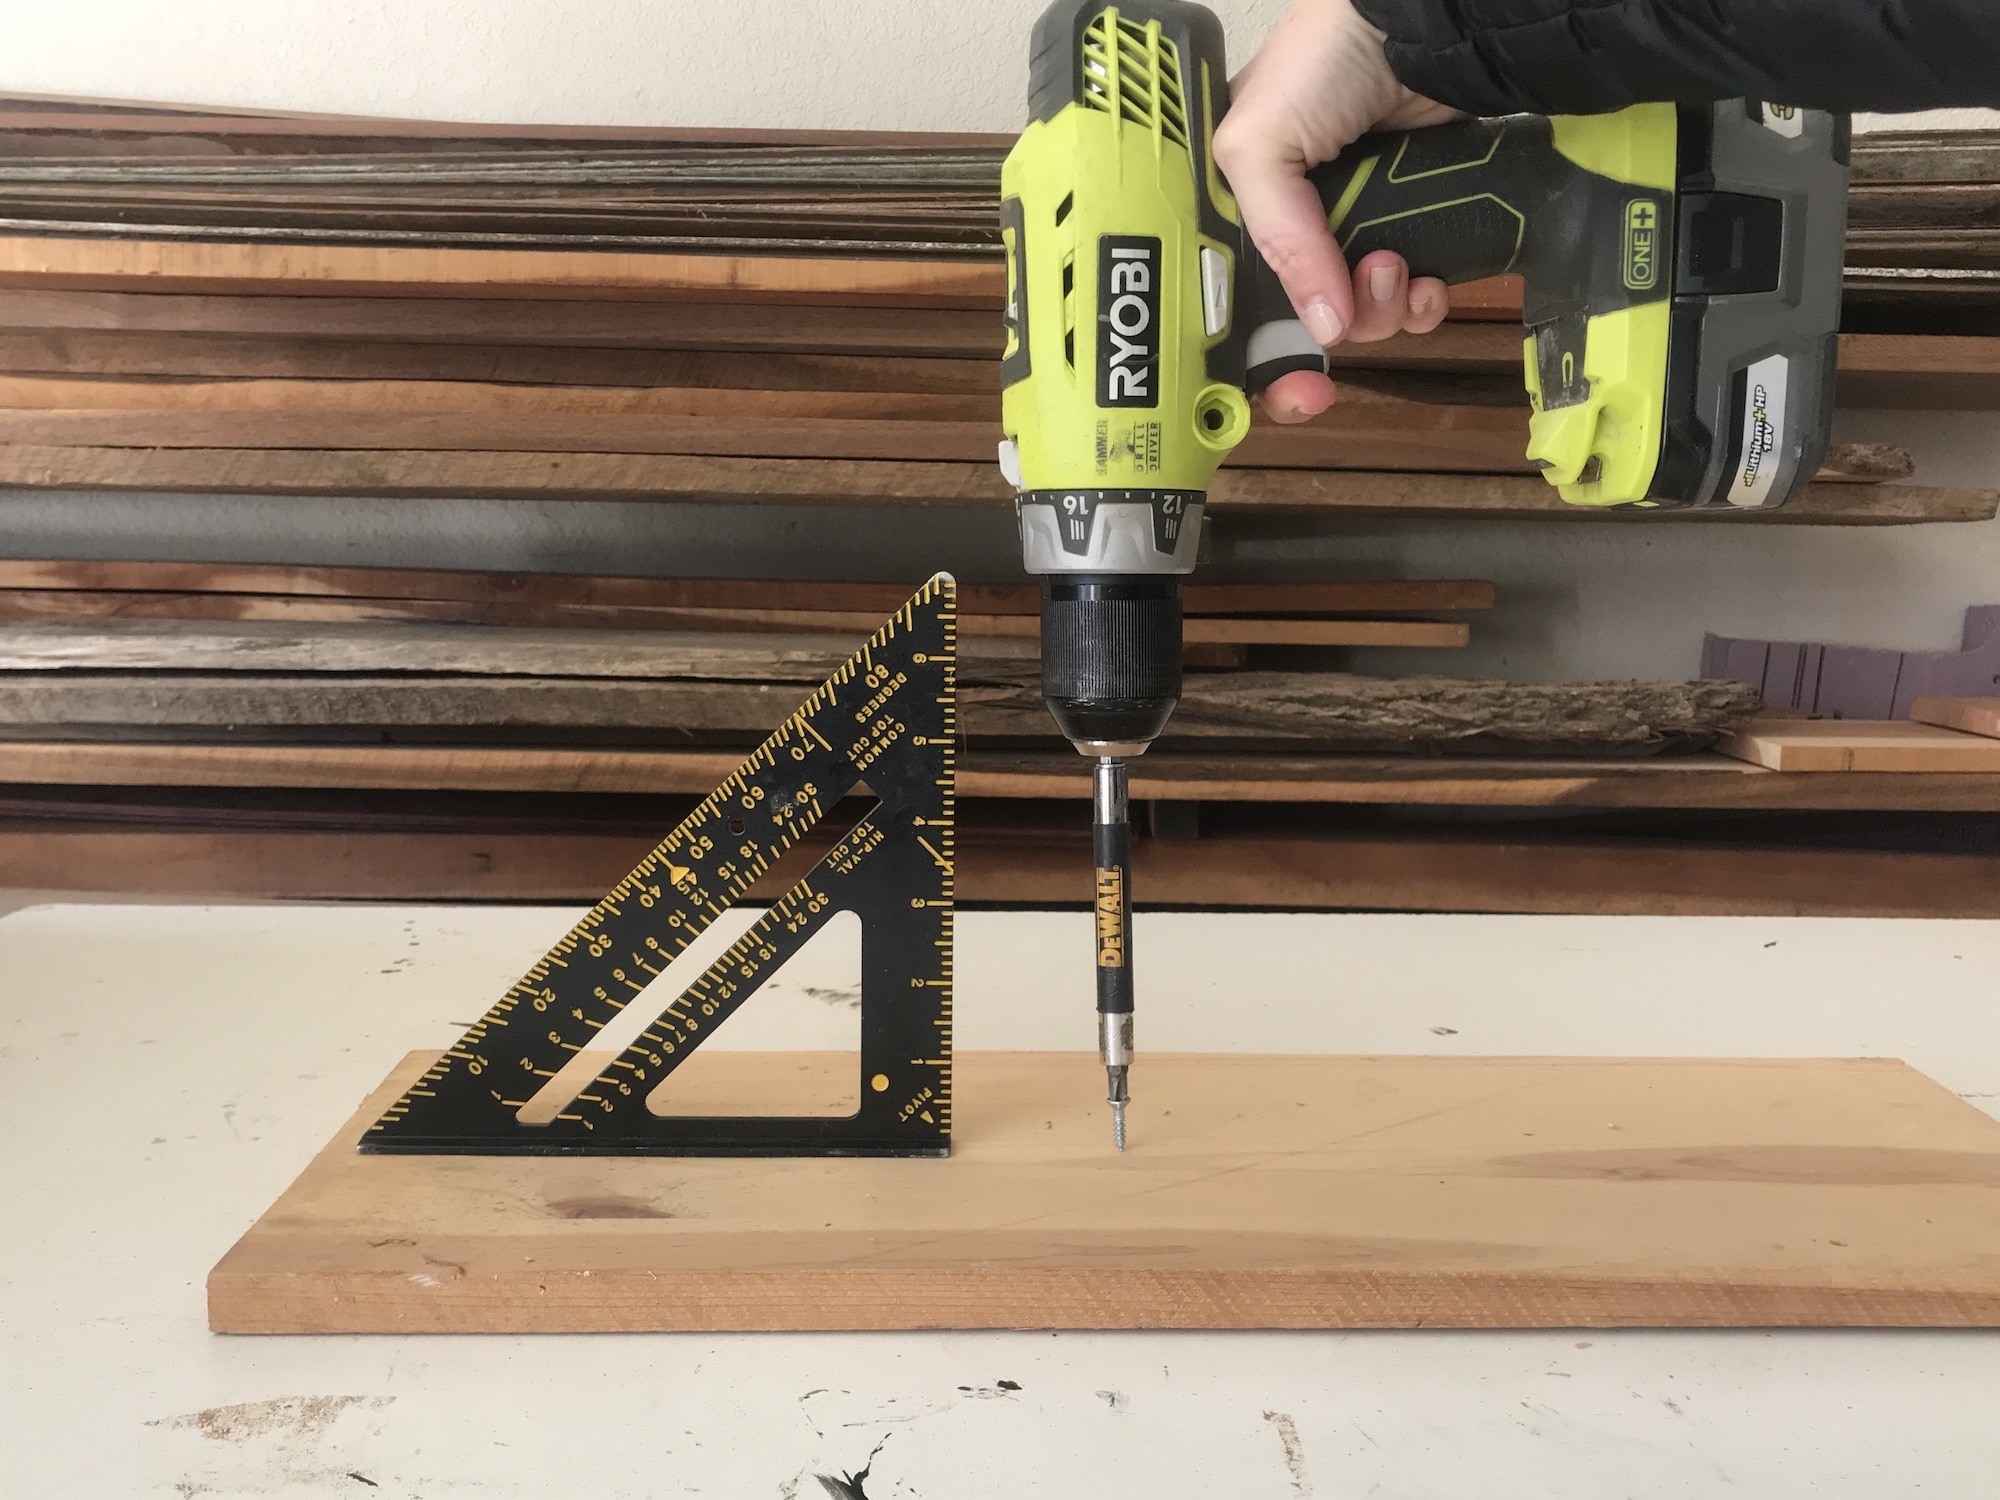 How to Use Power Drills and Drill Bits: A Beginner’s Guide